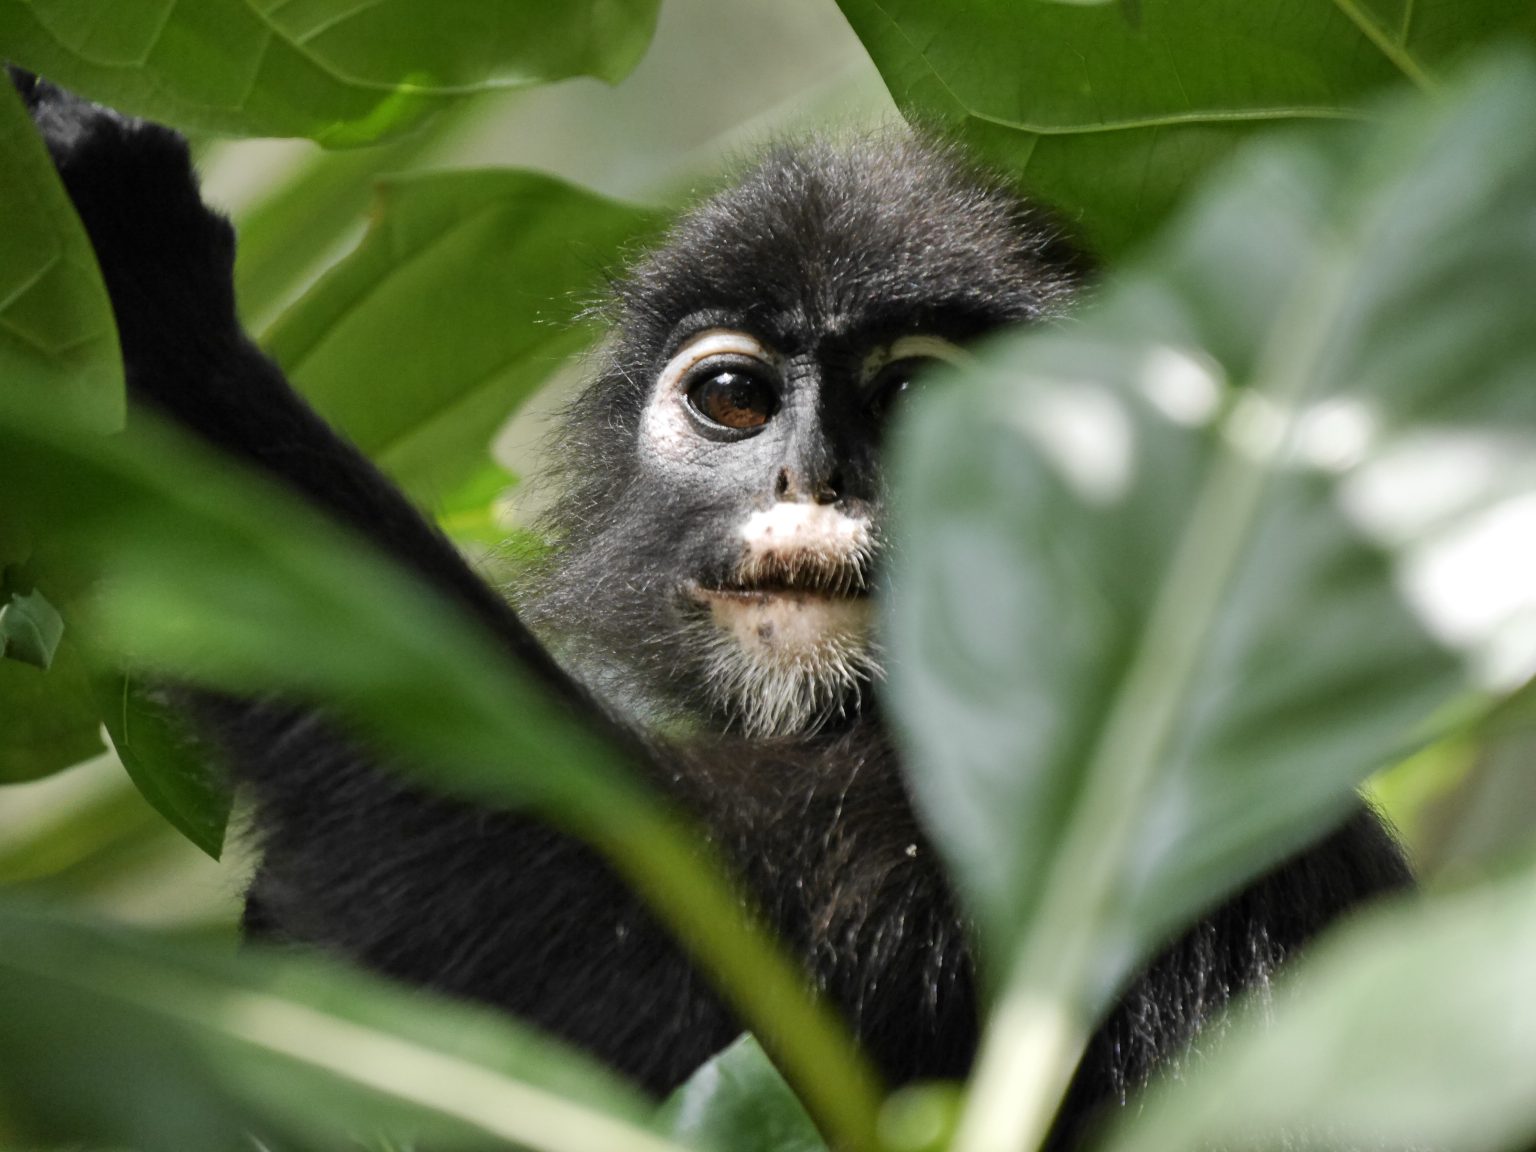 Monkey among tree leaves. Photo contributed by Reyes Martinez to the WordPress Photo Directory.